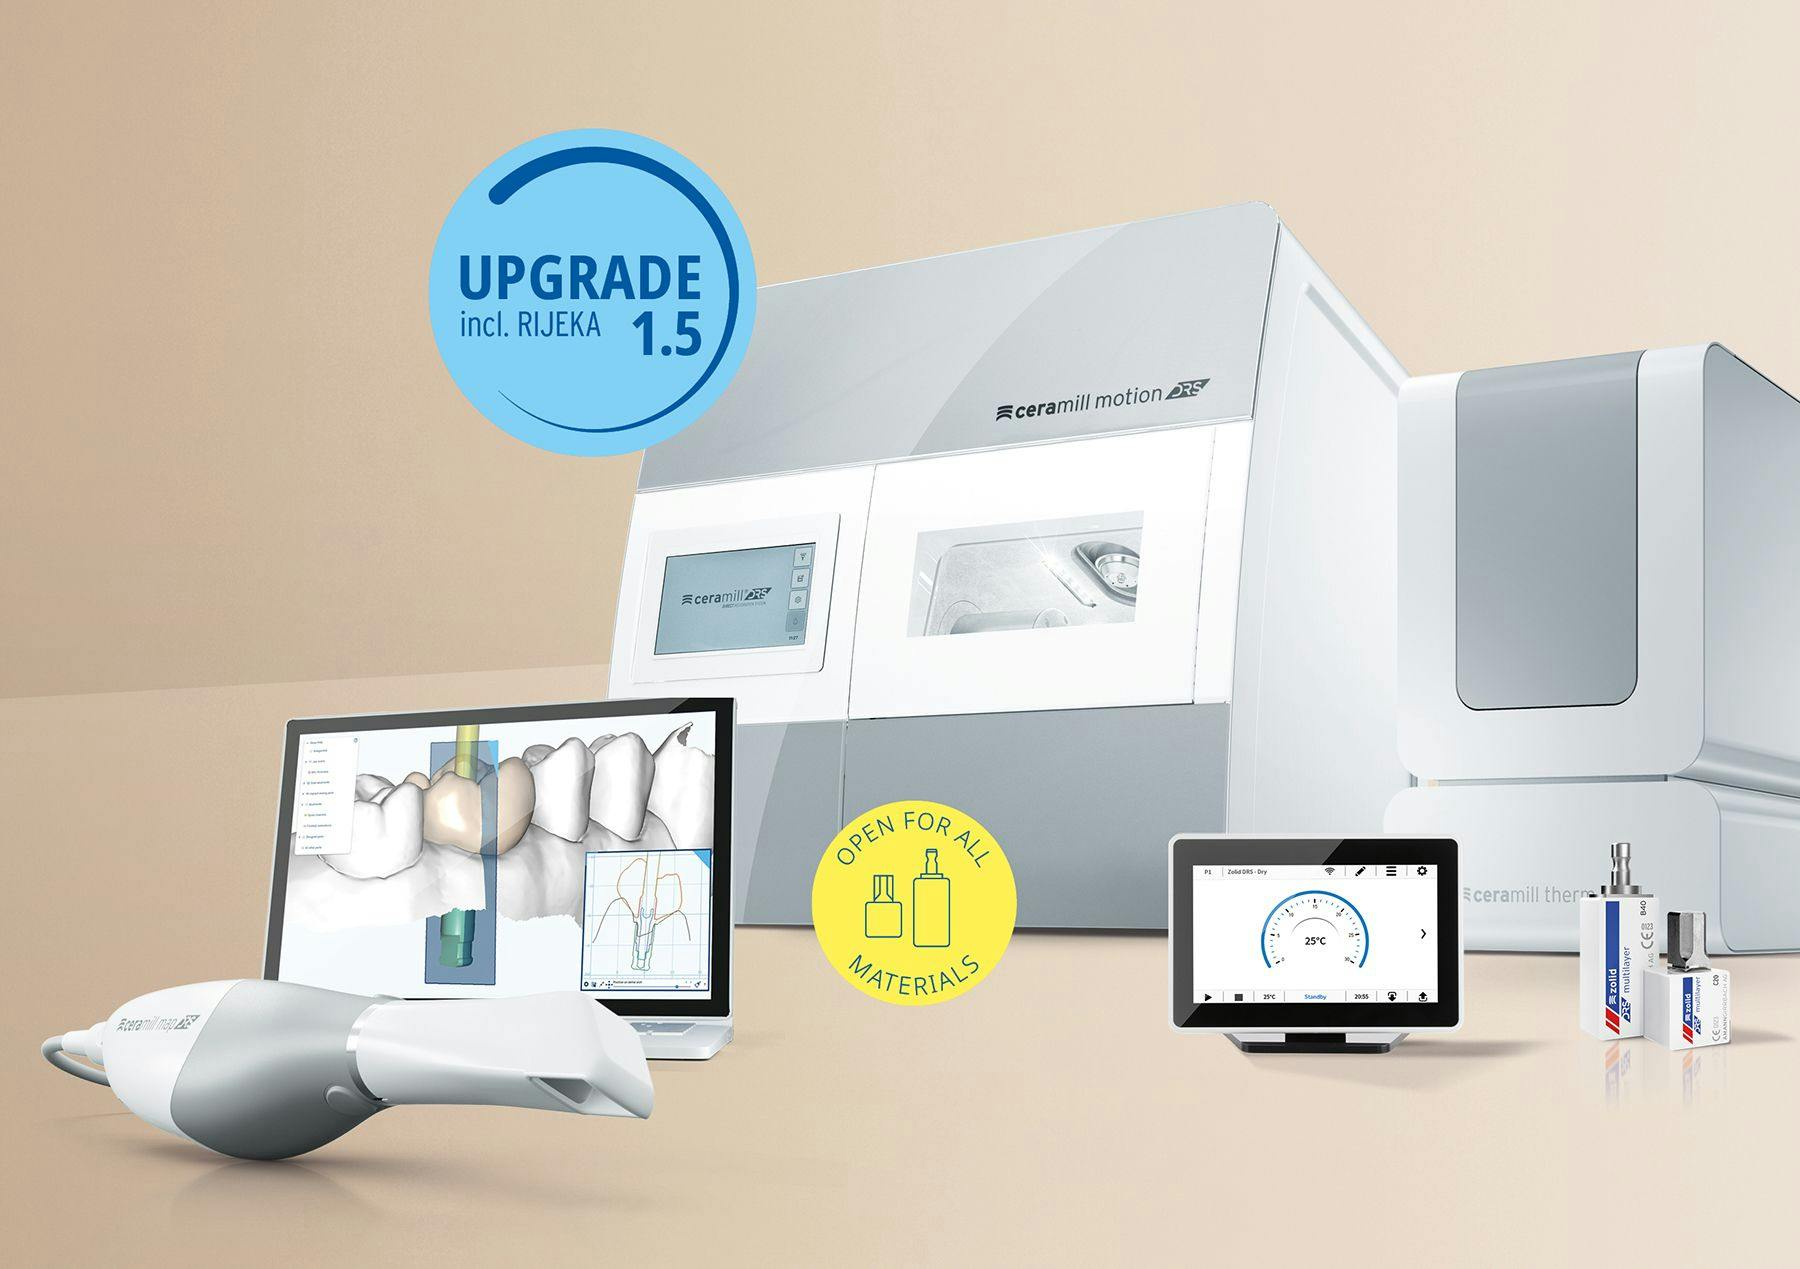 Ceramill DRS Software Upgrade 1.5 from Amann Girrbach | Image Credit: © Amann Girrbach